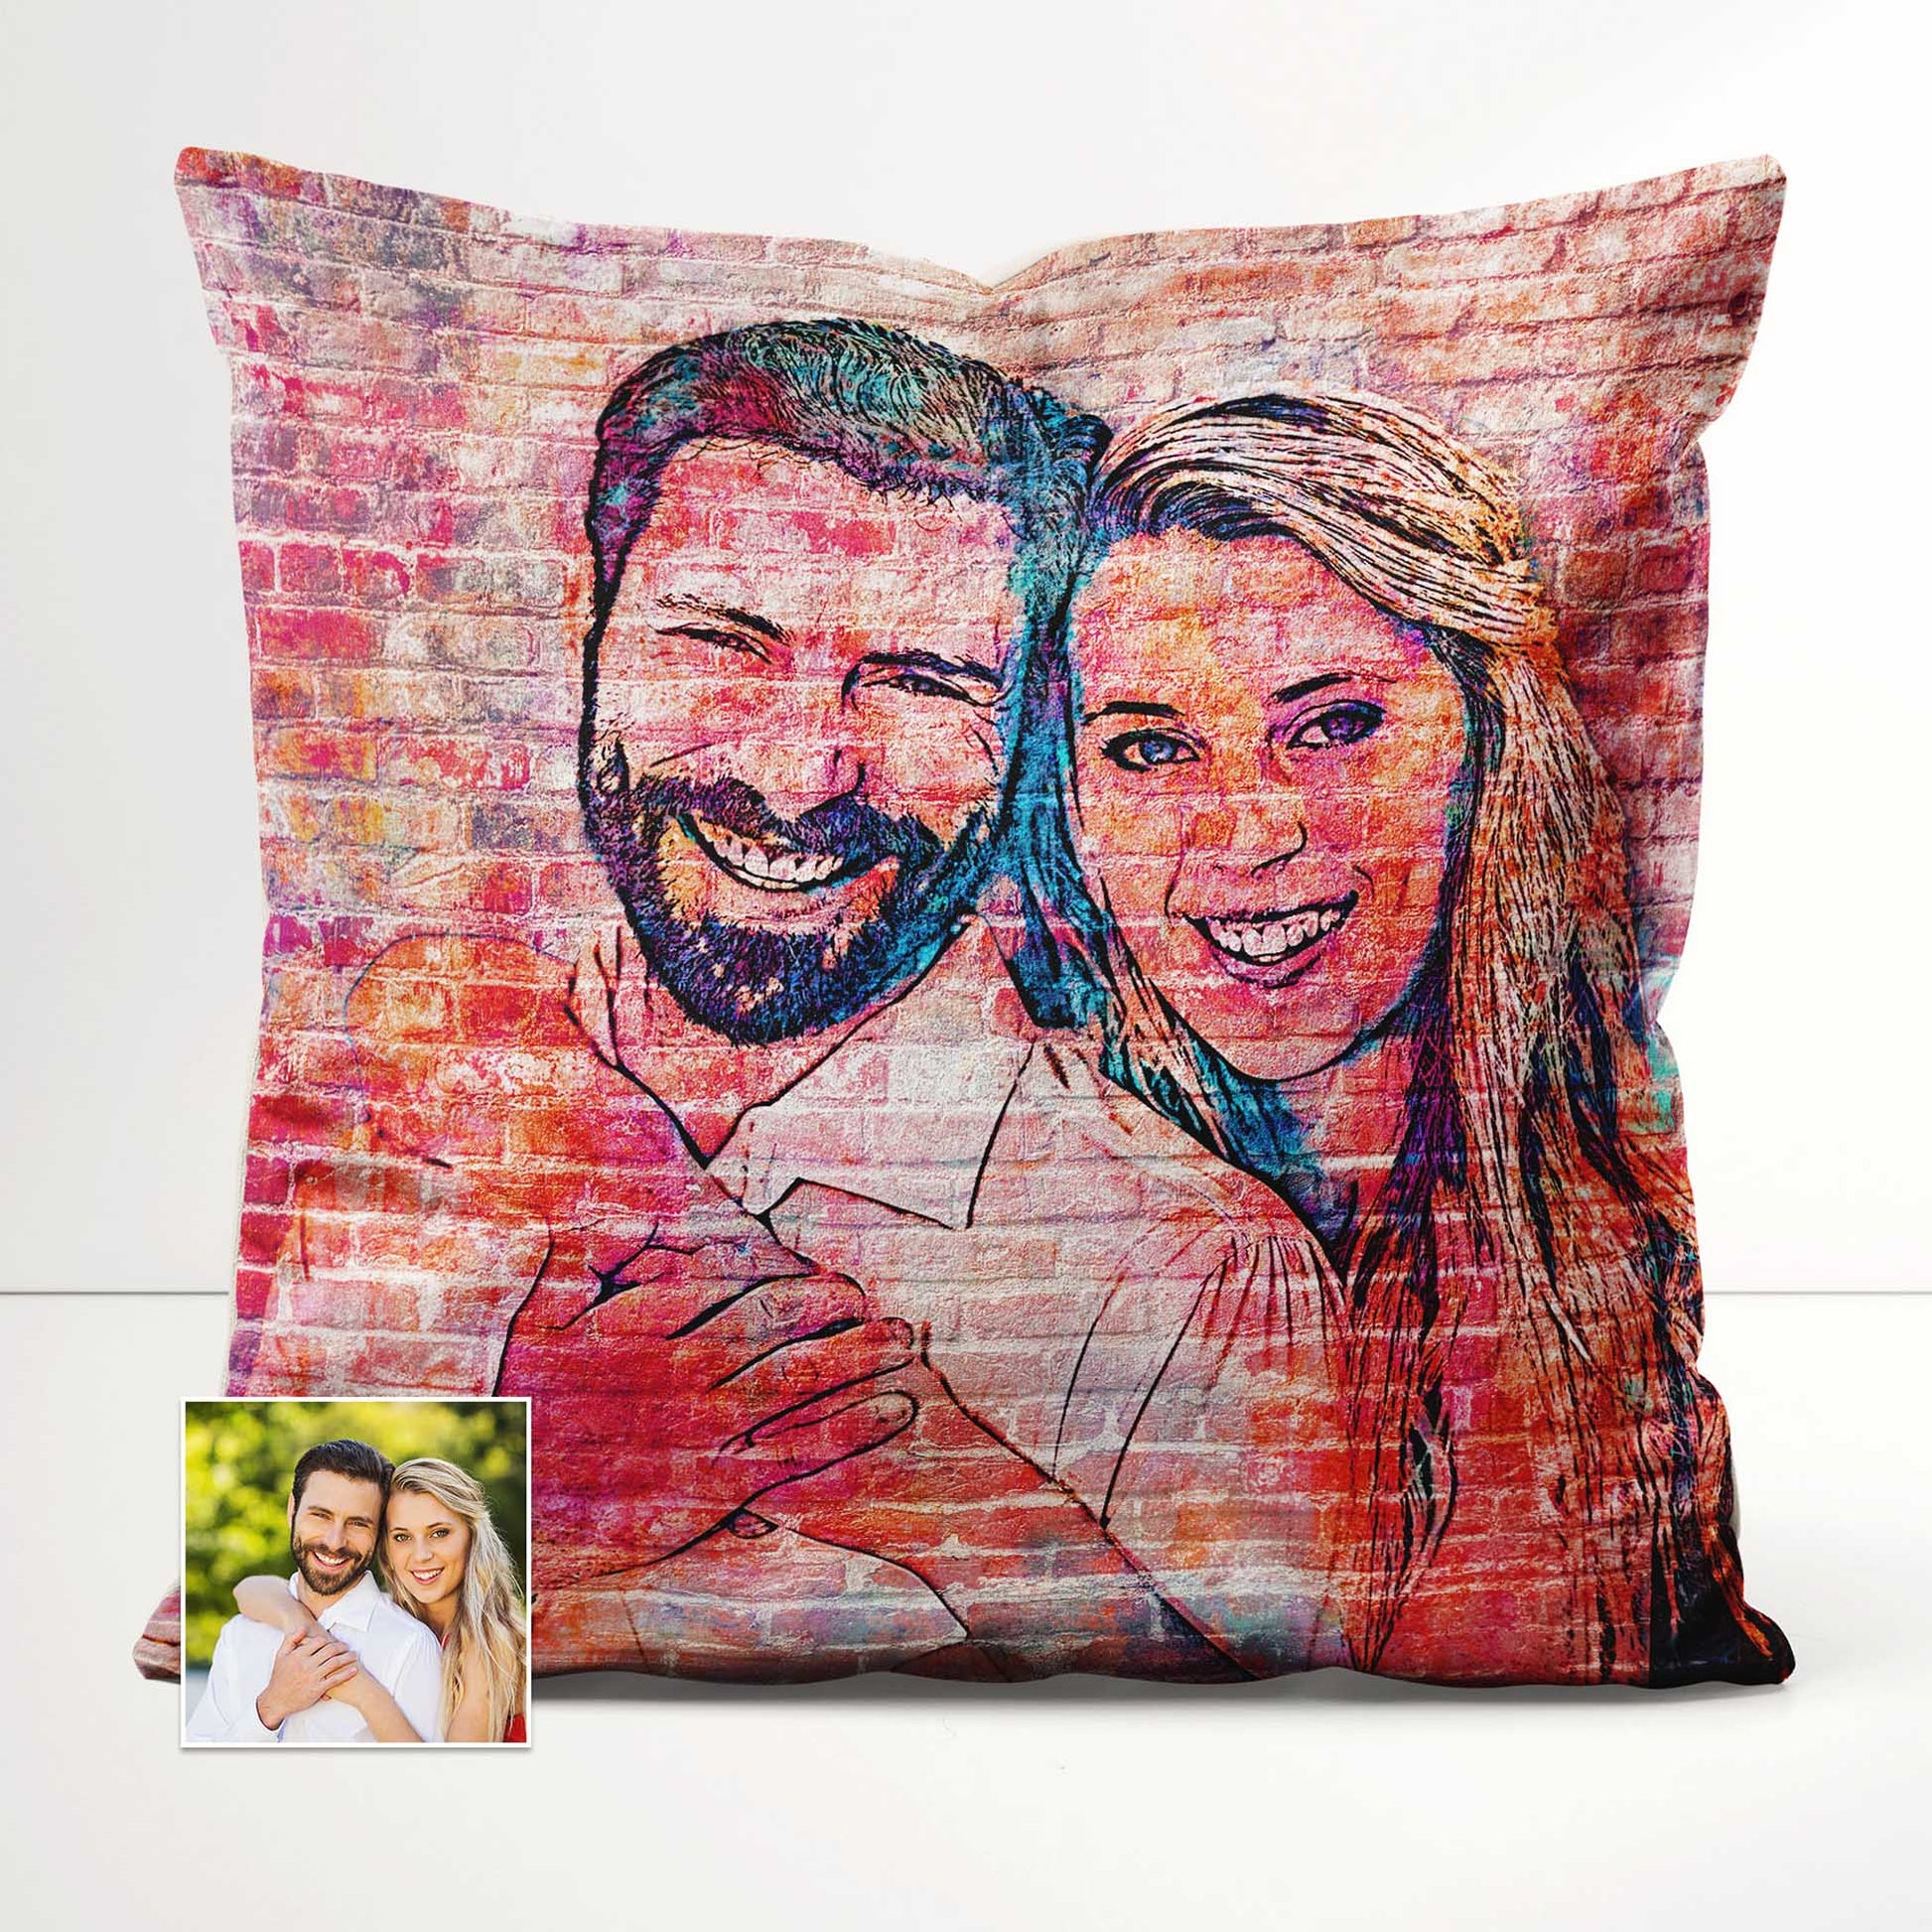 Experience the vibrant energy of street art with the Personalised Brick Graffiti Street Art Cushion. Handmade with attention to detail and crafted from soft velvet, it provides a luxurious and comfortable touch